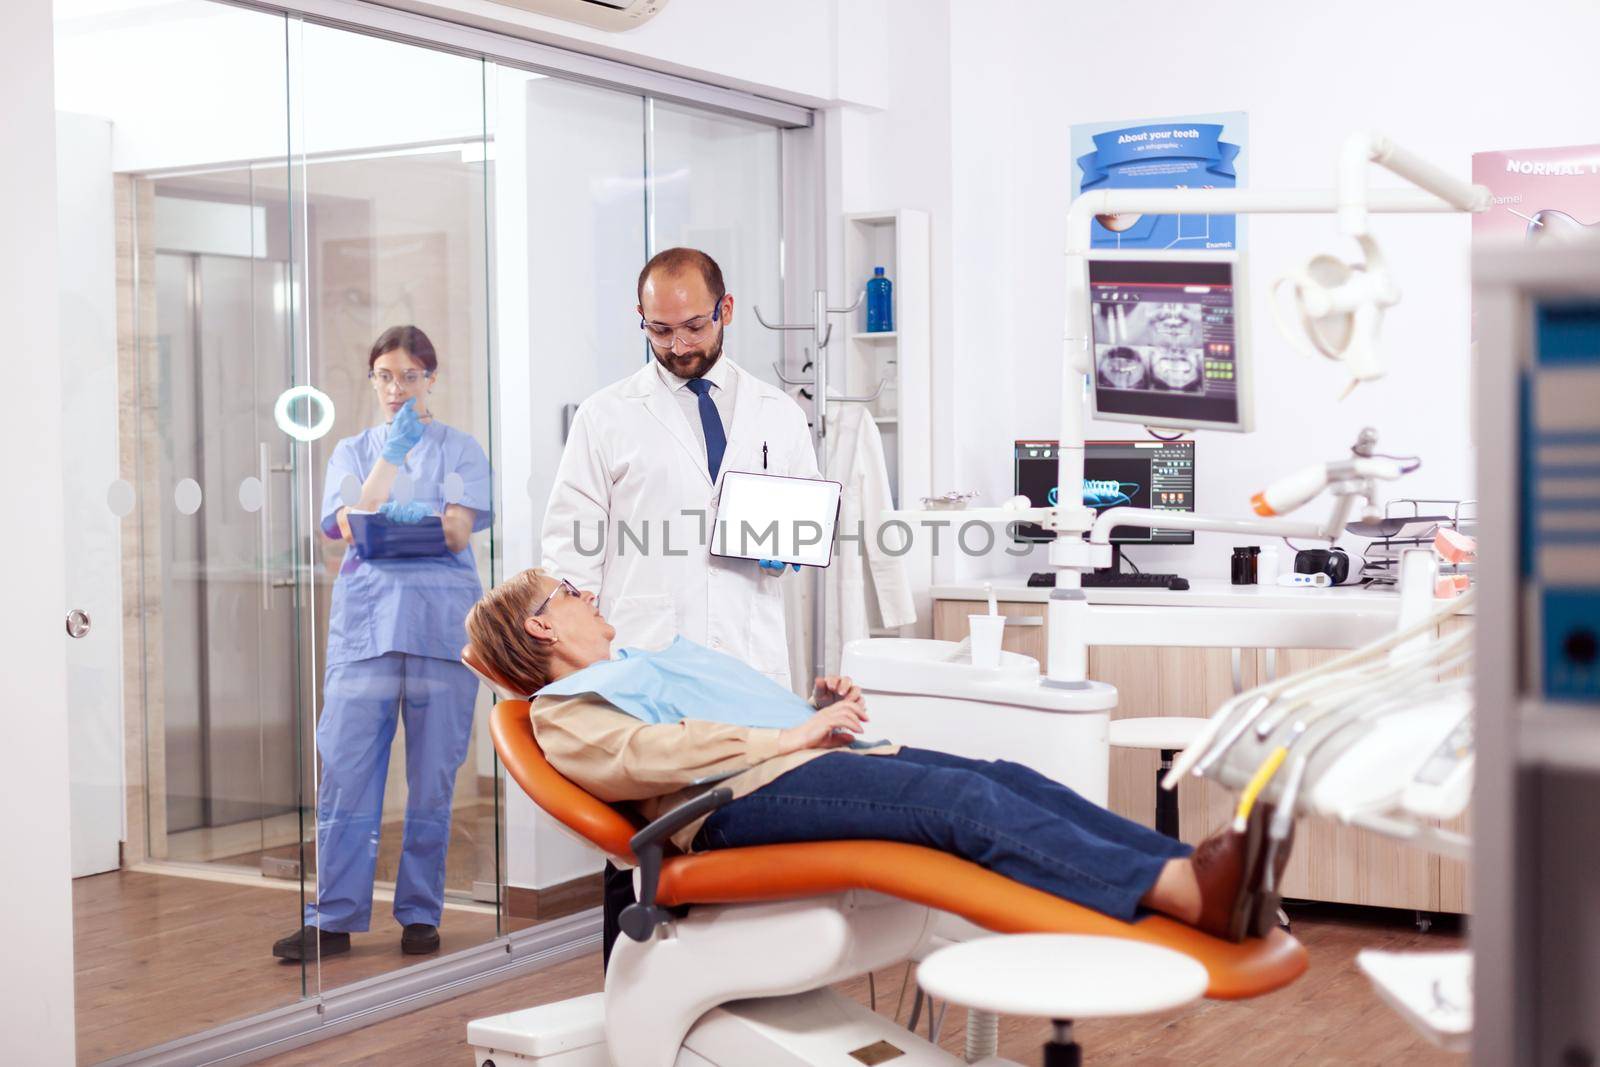 Dentist discussing with senior woman in cabinet holding tablet pc with copy sapce available. Medical teeth care using digital device with patient radiography on tablet pc near patient standing up.